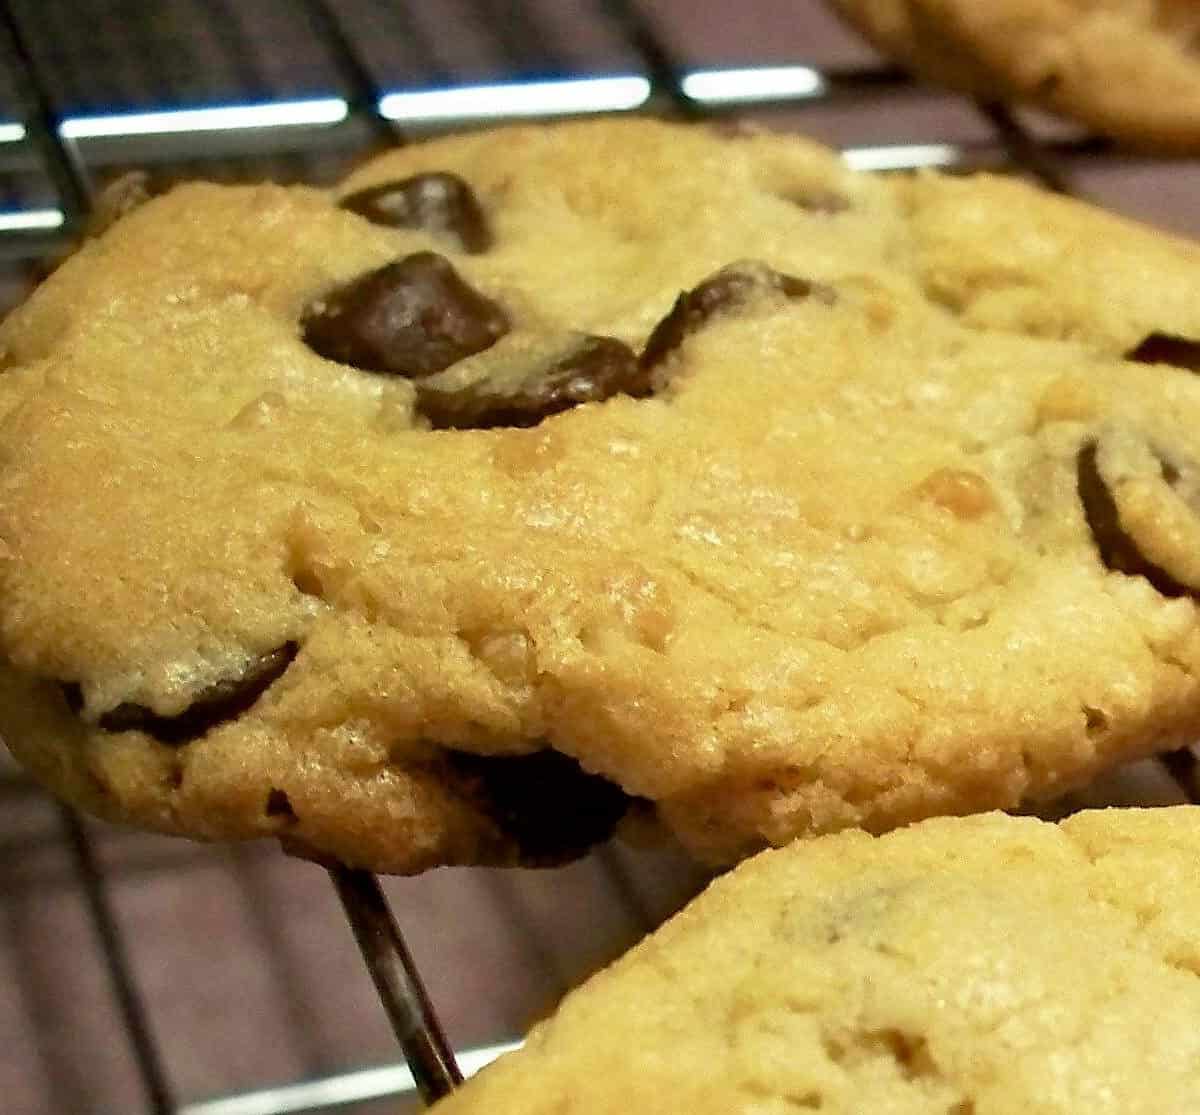  Freshly baked Toll House chocolate chip cookies are the perfect way to satisfy your sweet tooth.